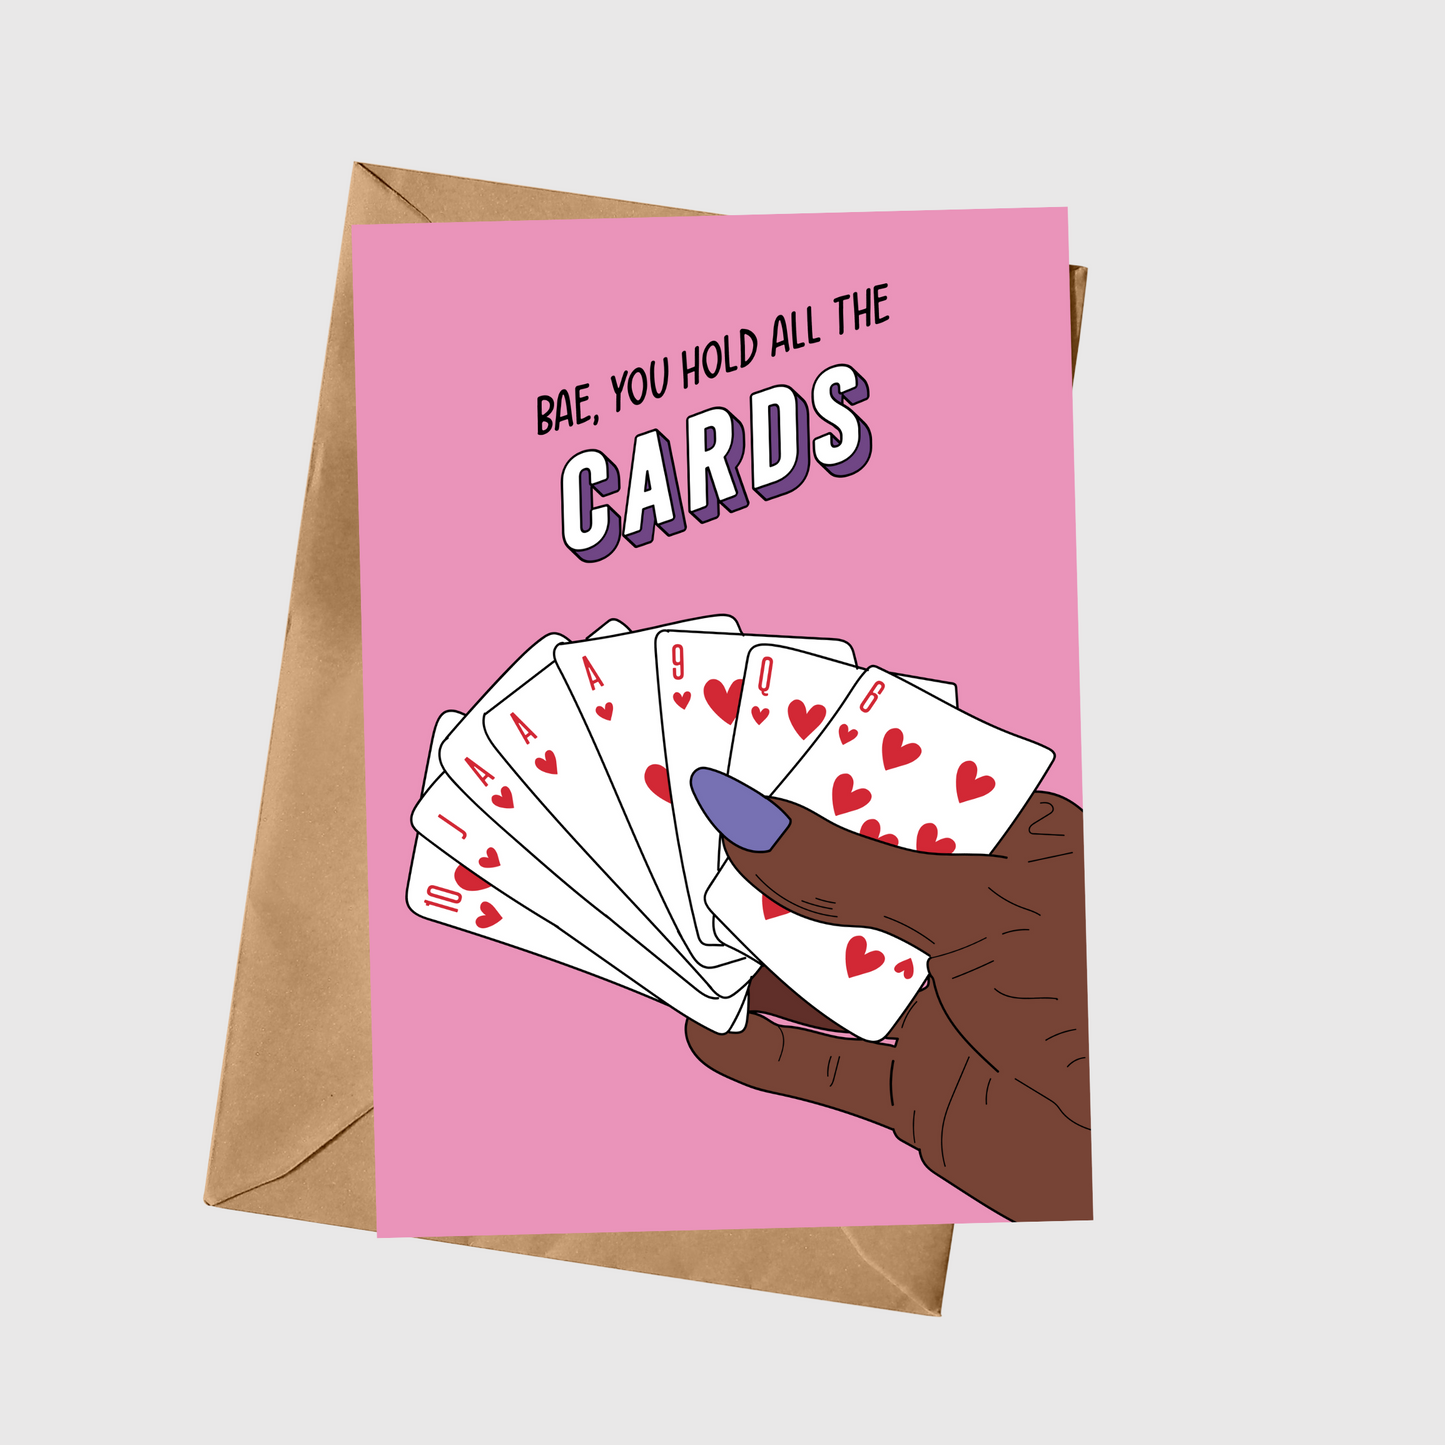 Bae, You Hold All The Cards